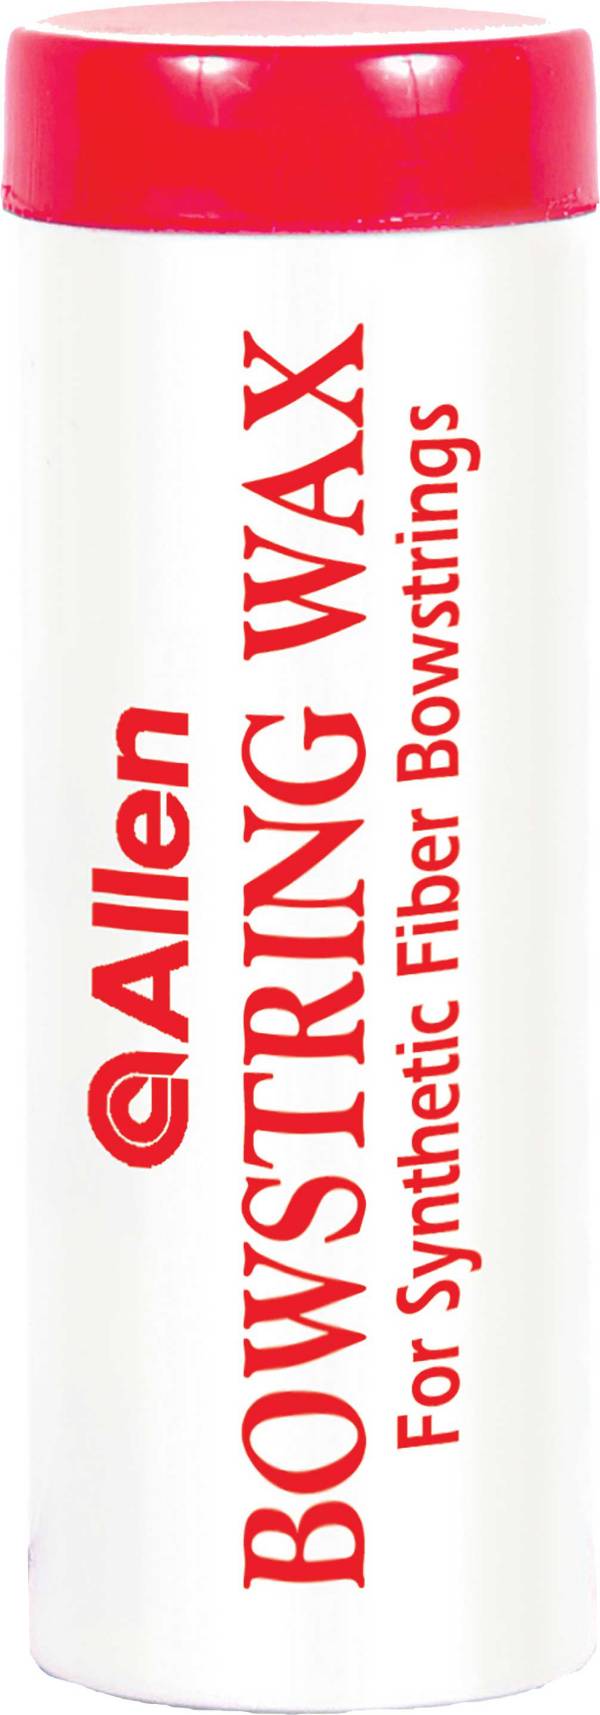 Allen Bowstring Wax product image